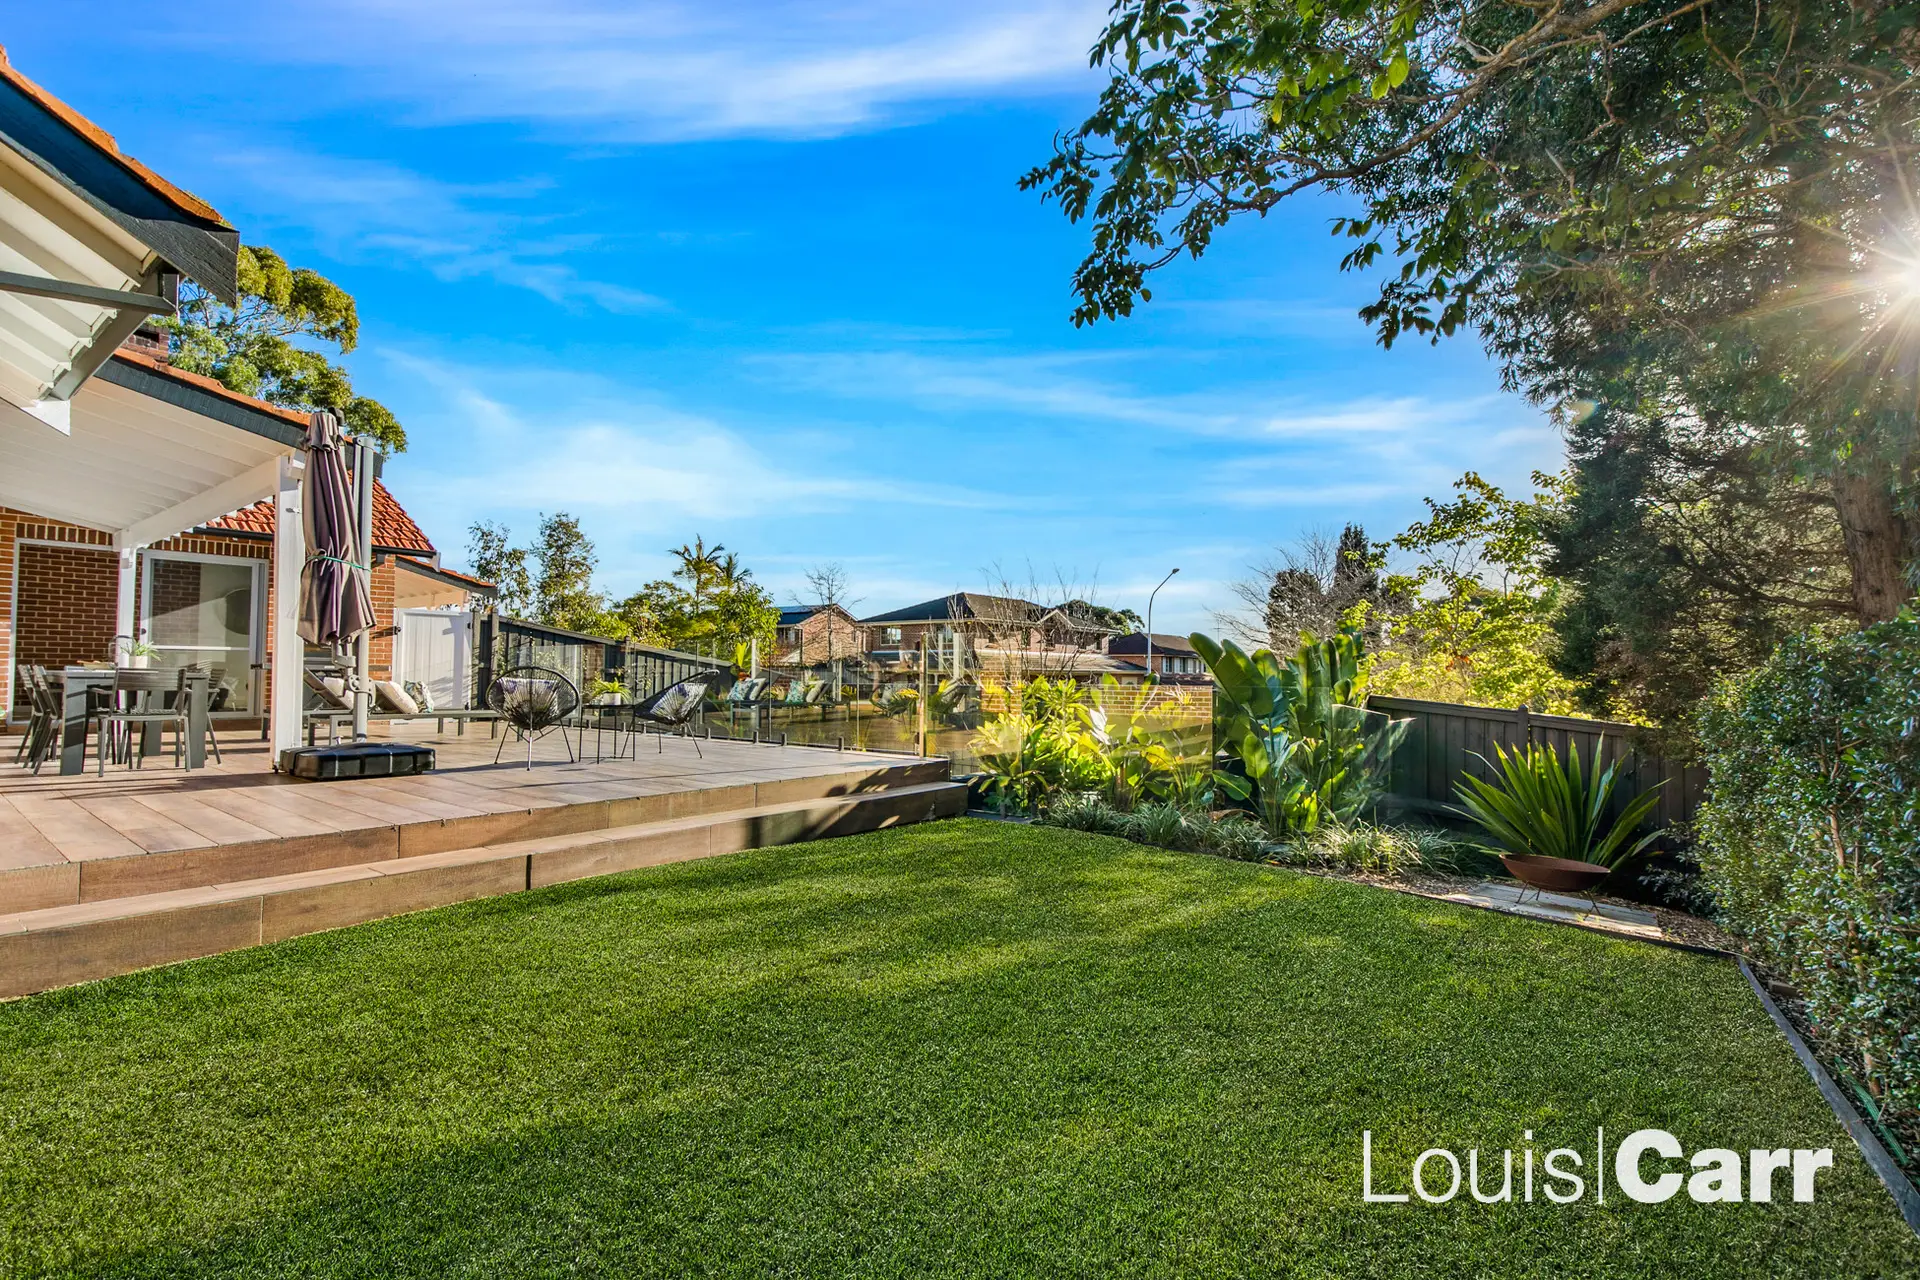 Photo #10: 216 Shepherds Drive, Cherrybrook - Sold by Louis Carr Real Estate